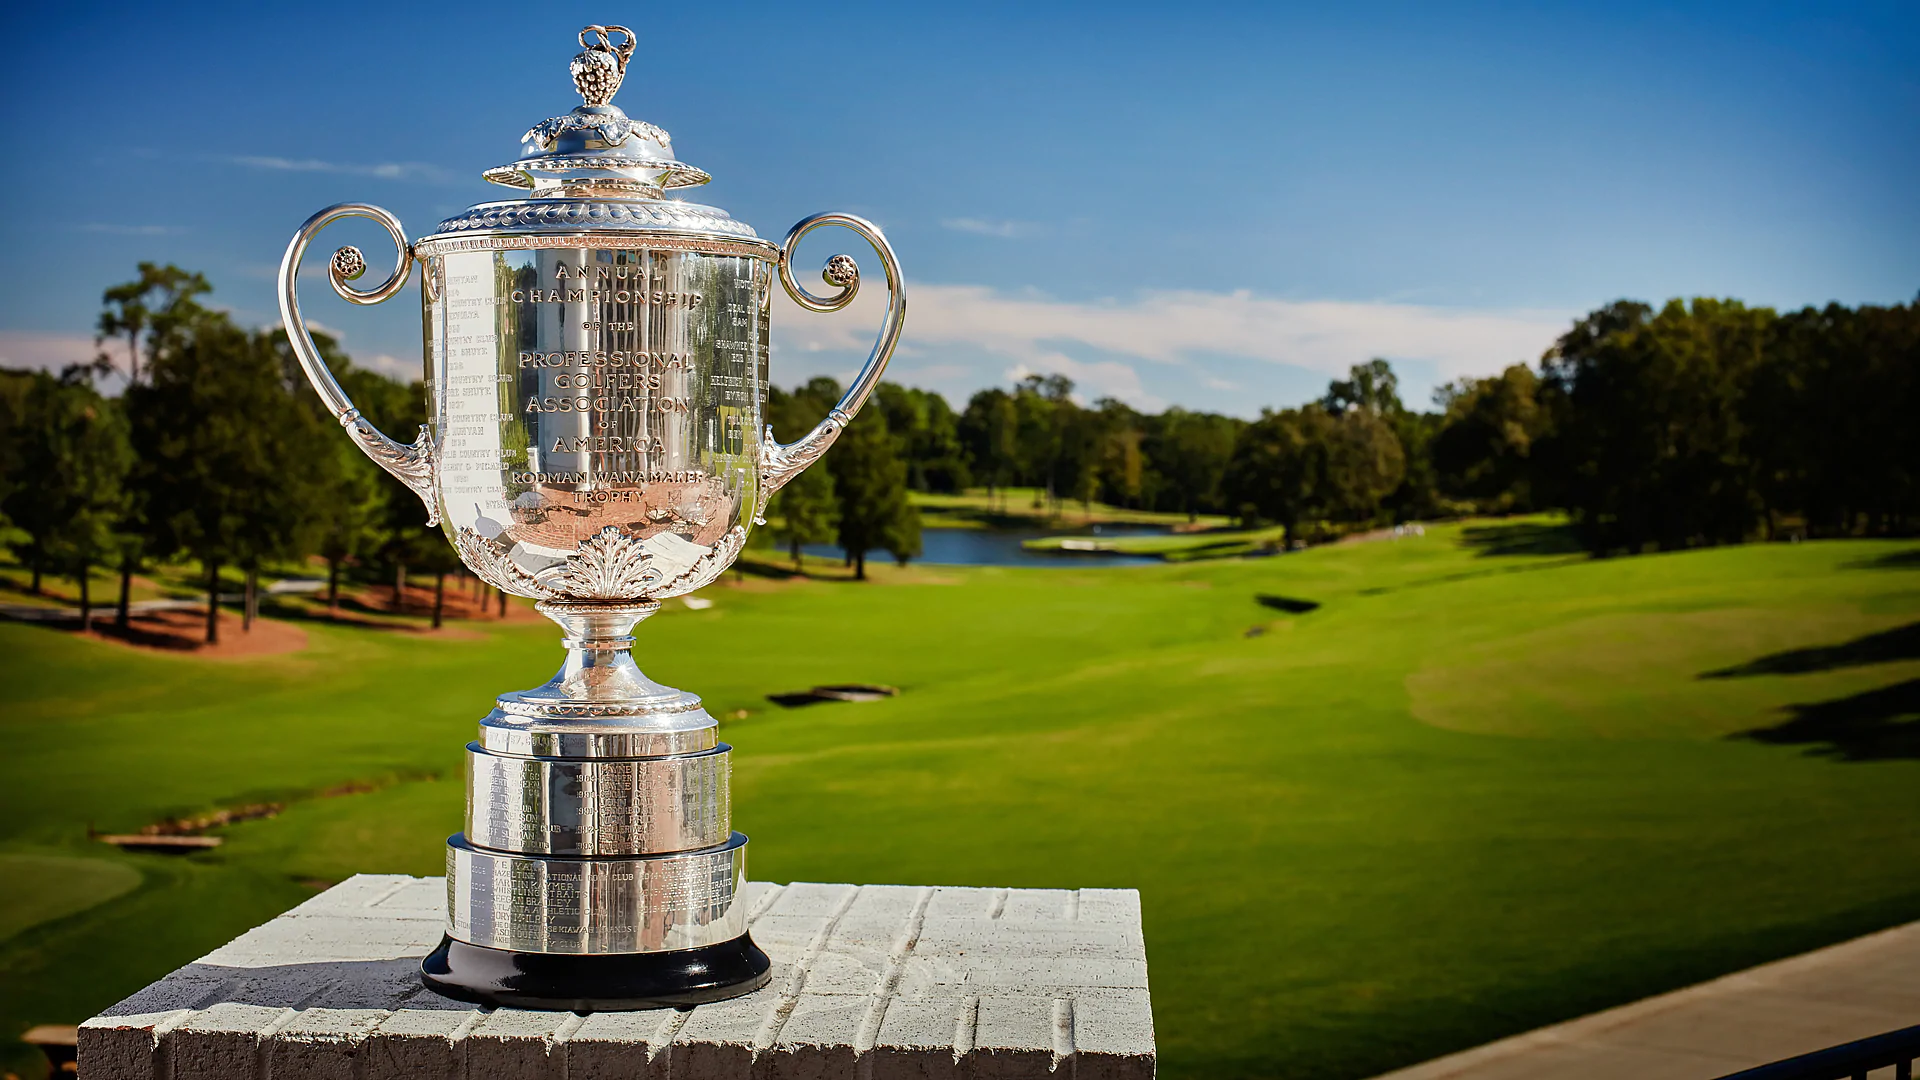 Report: PGA Championship moving to May in 2019